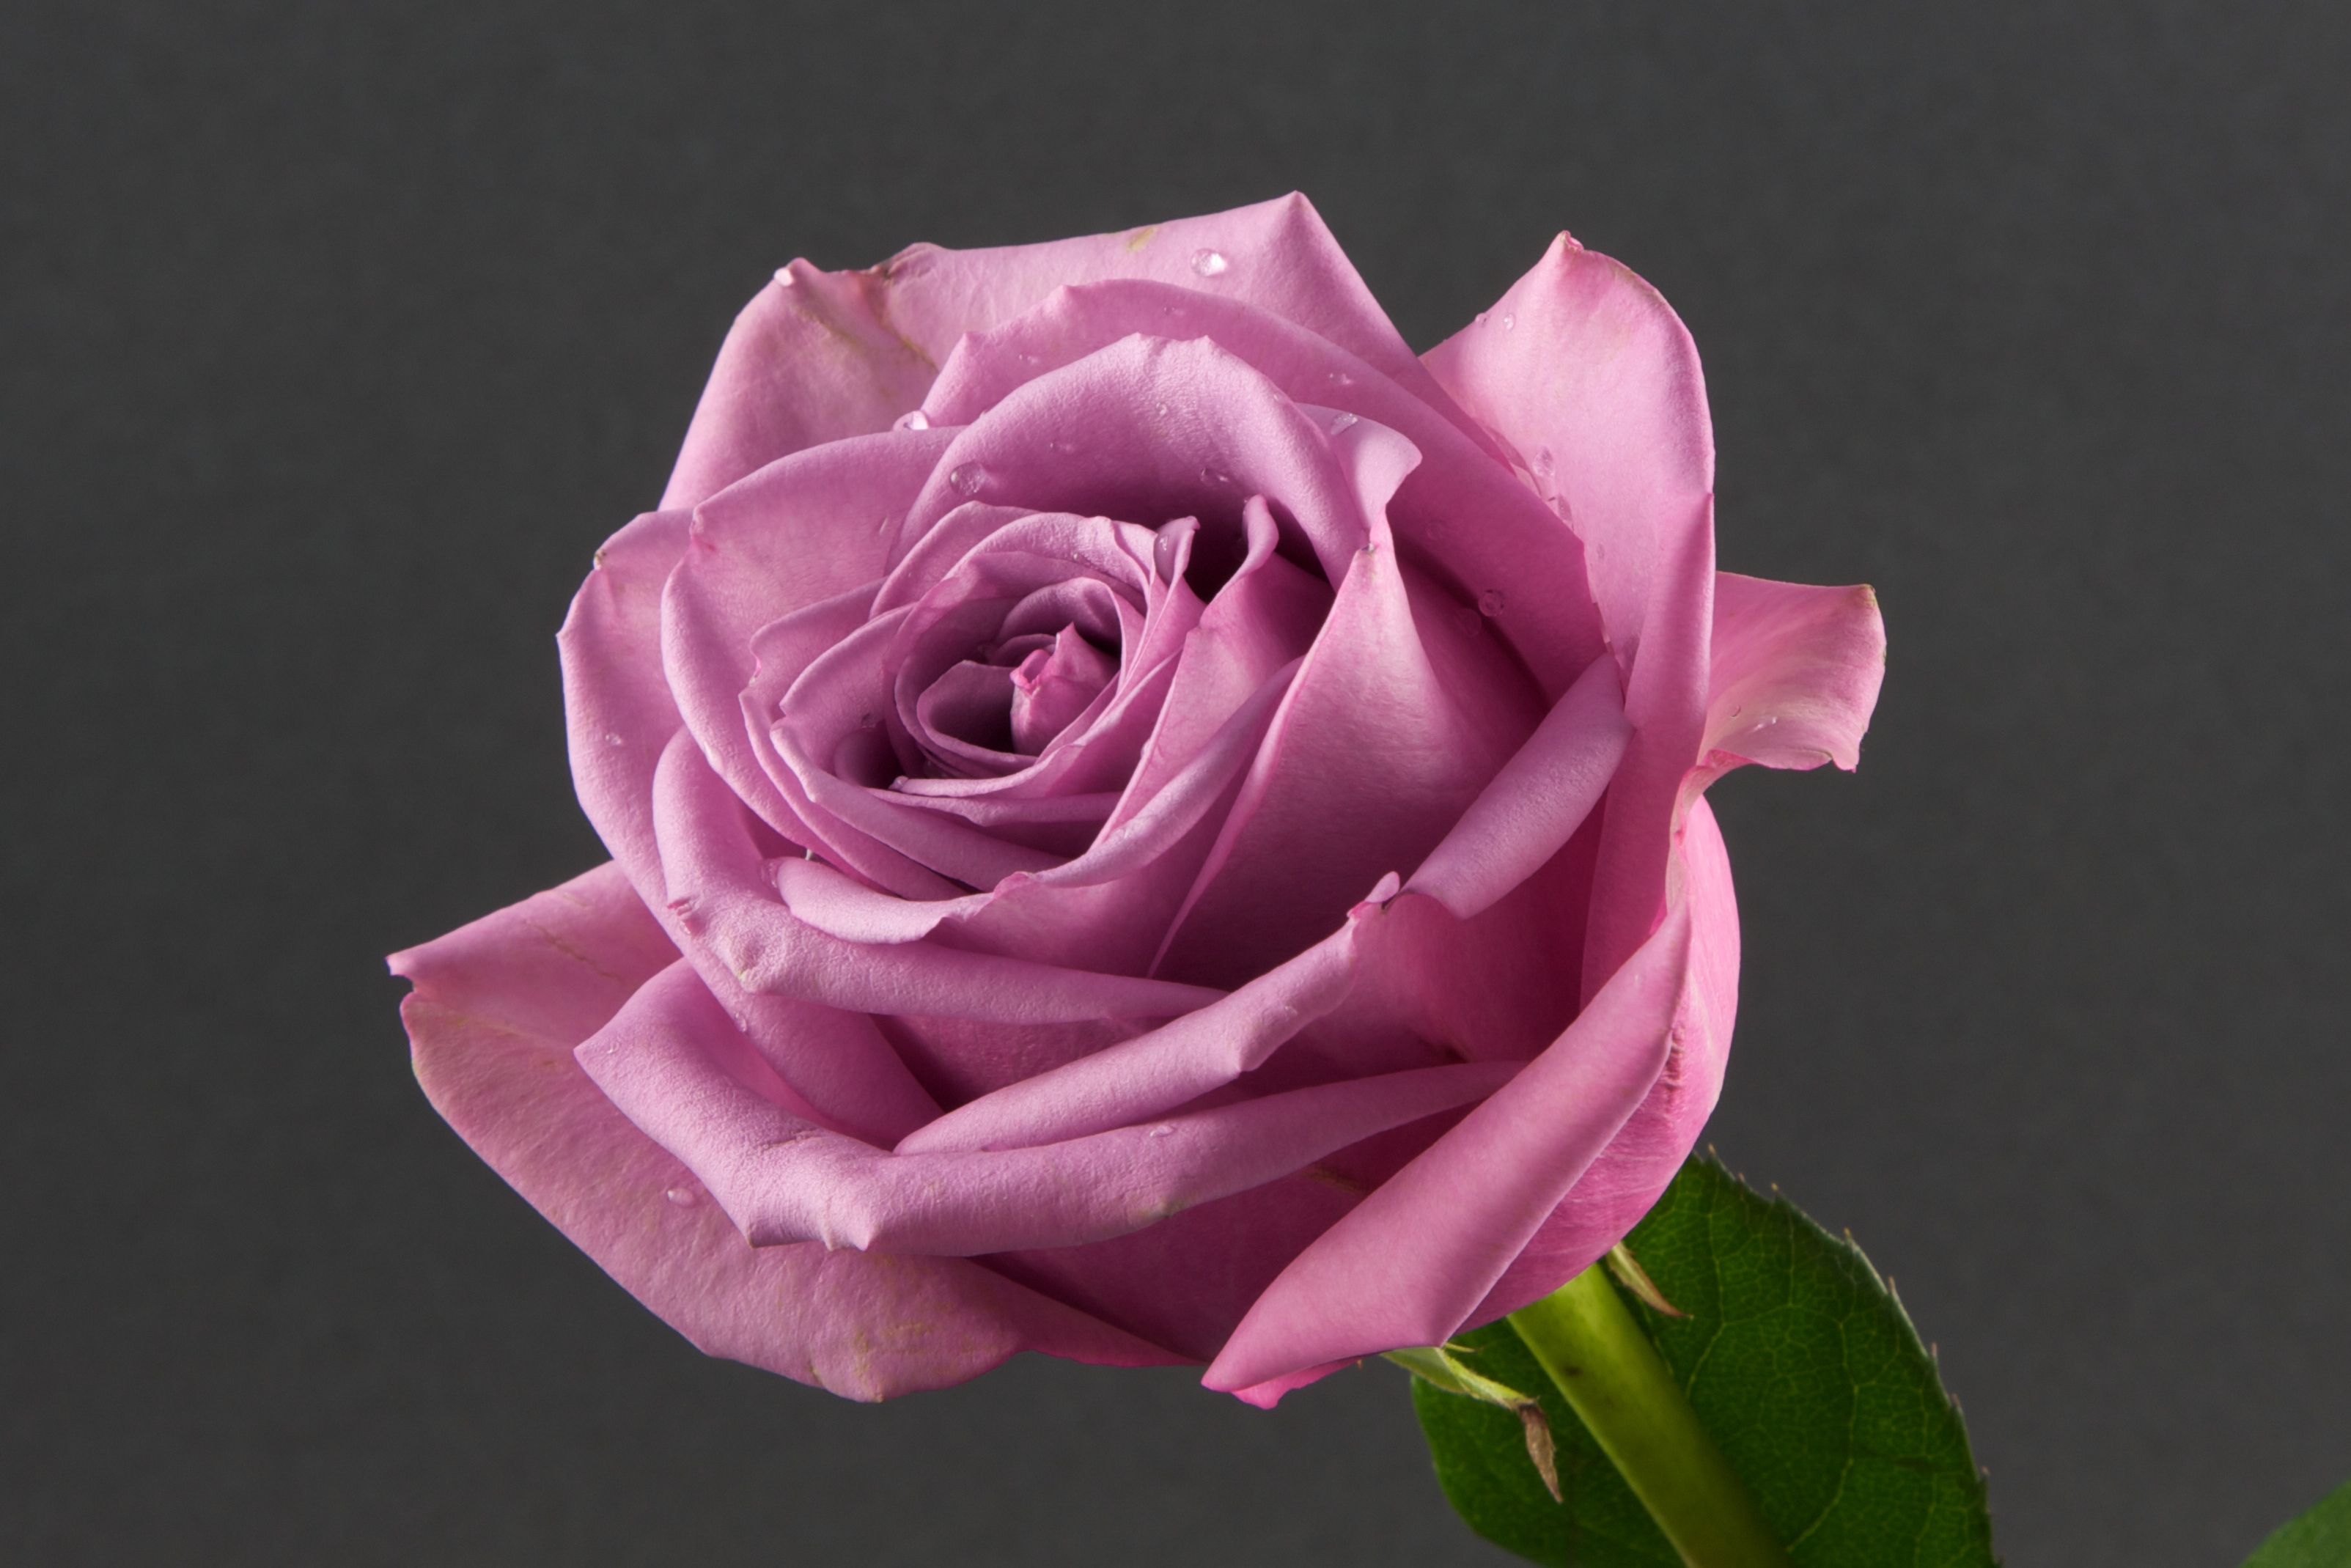 Free photo Rose on a gray background